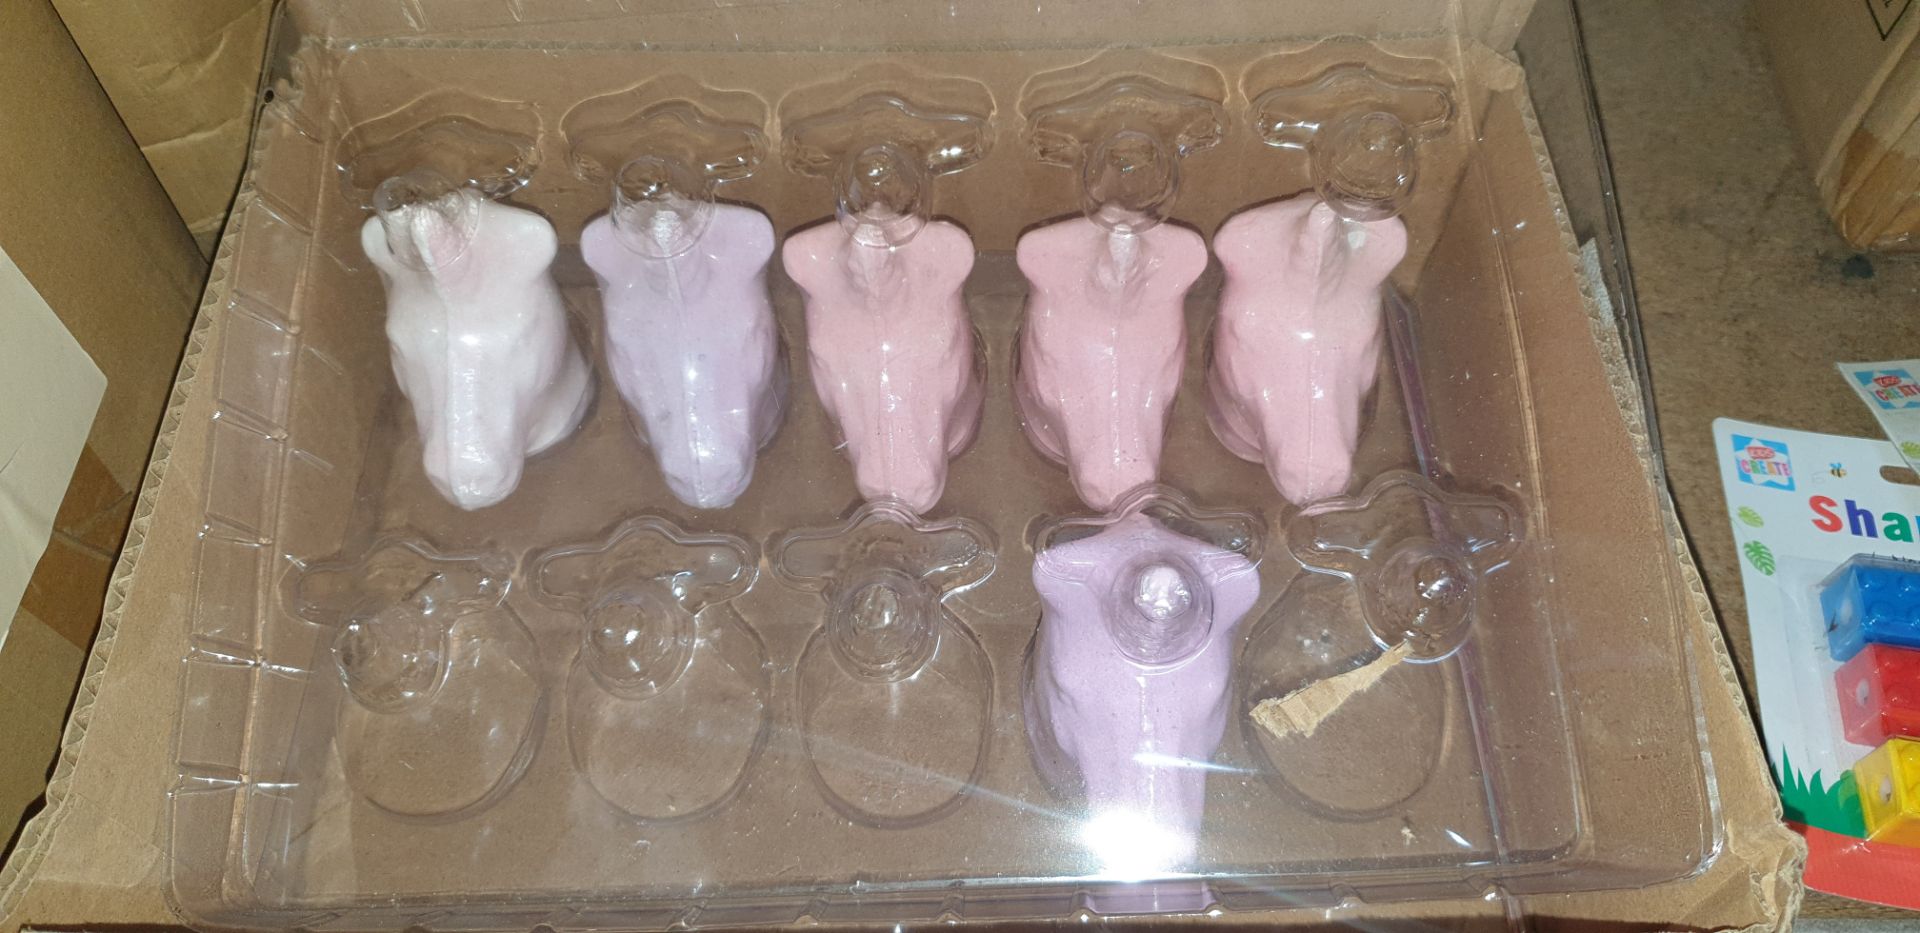 75 off animal shaped bath fizzers - Image 3 of 5